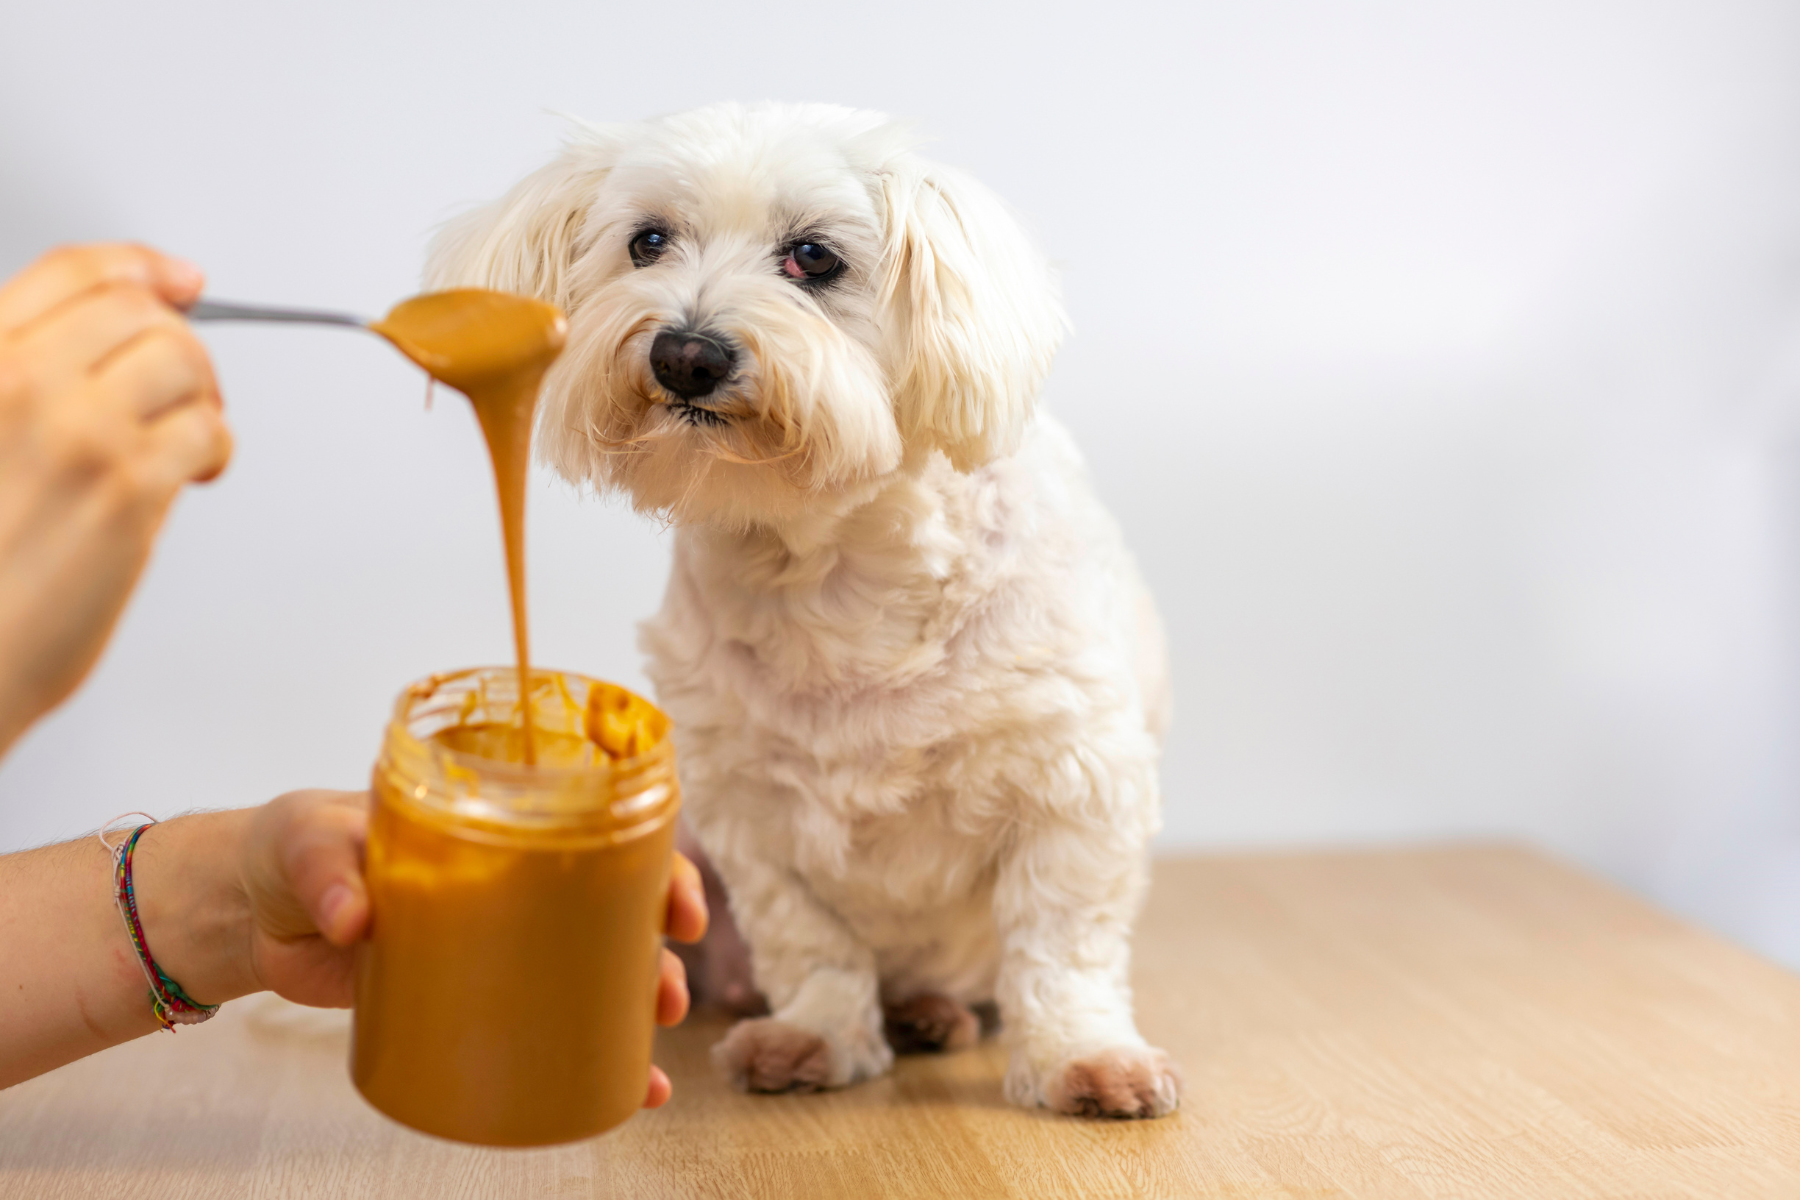 A person feeding peanut butter to a dog.